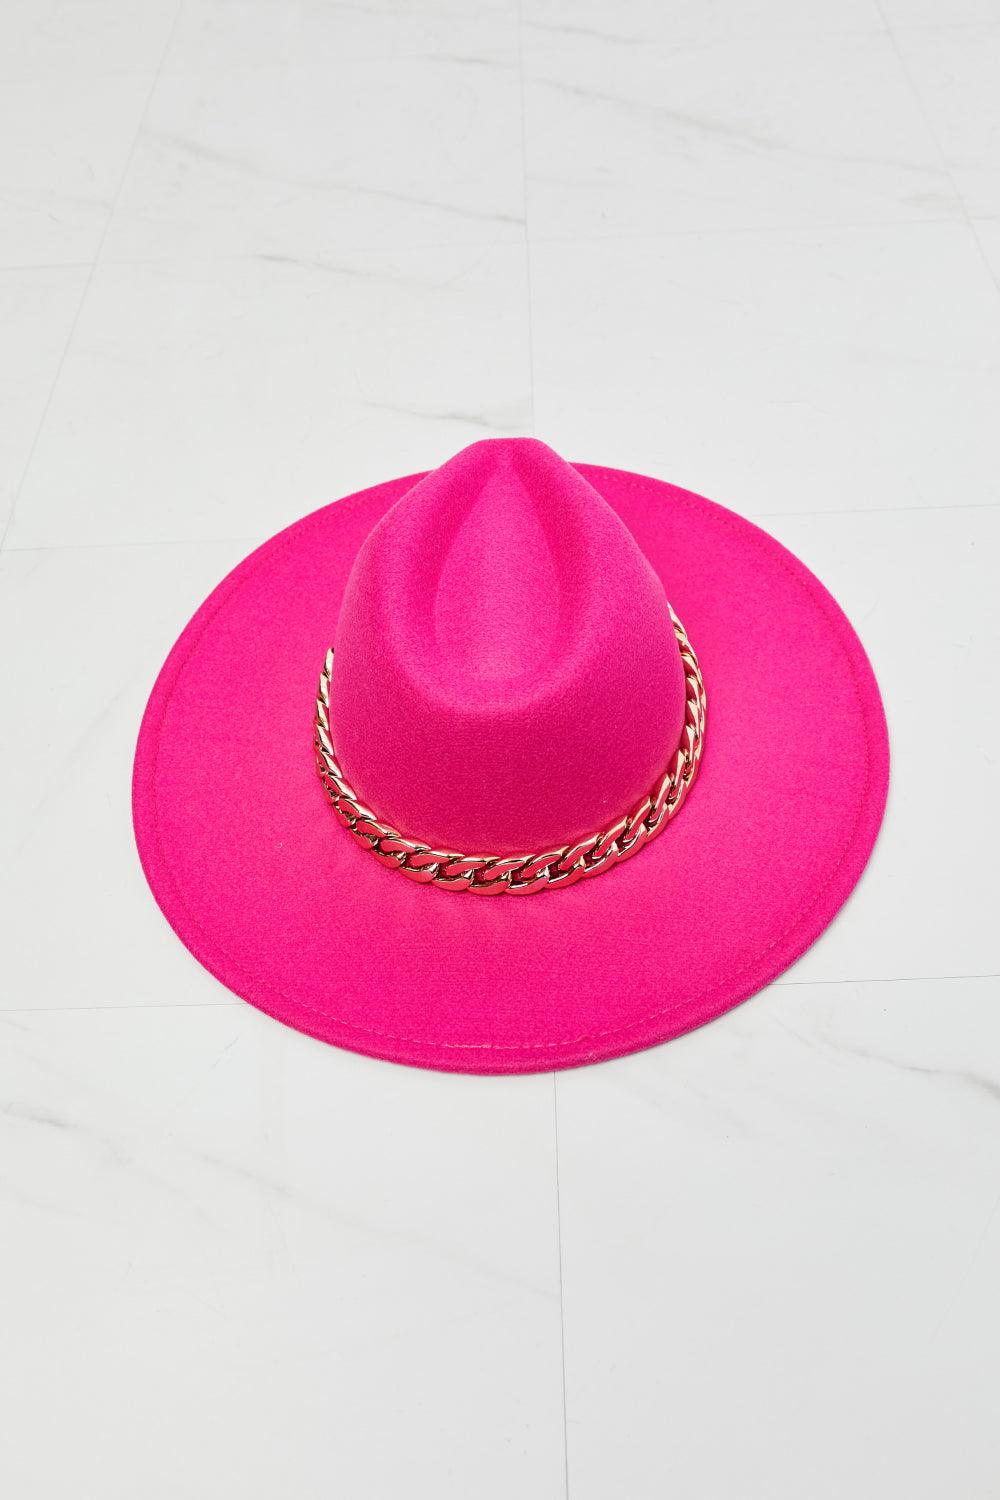 Fame Keep Your Promise Fedora Hat in Pink - Lab Fashion, Home & Health